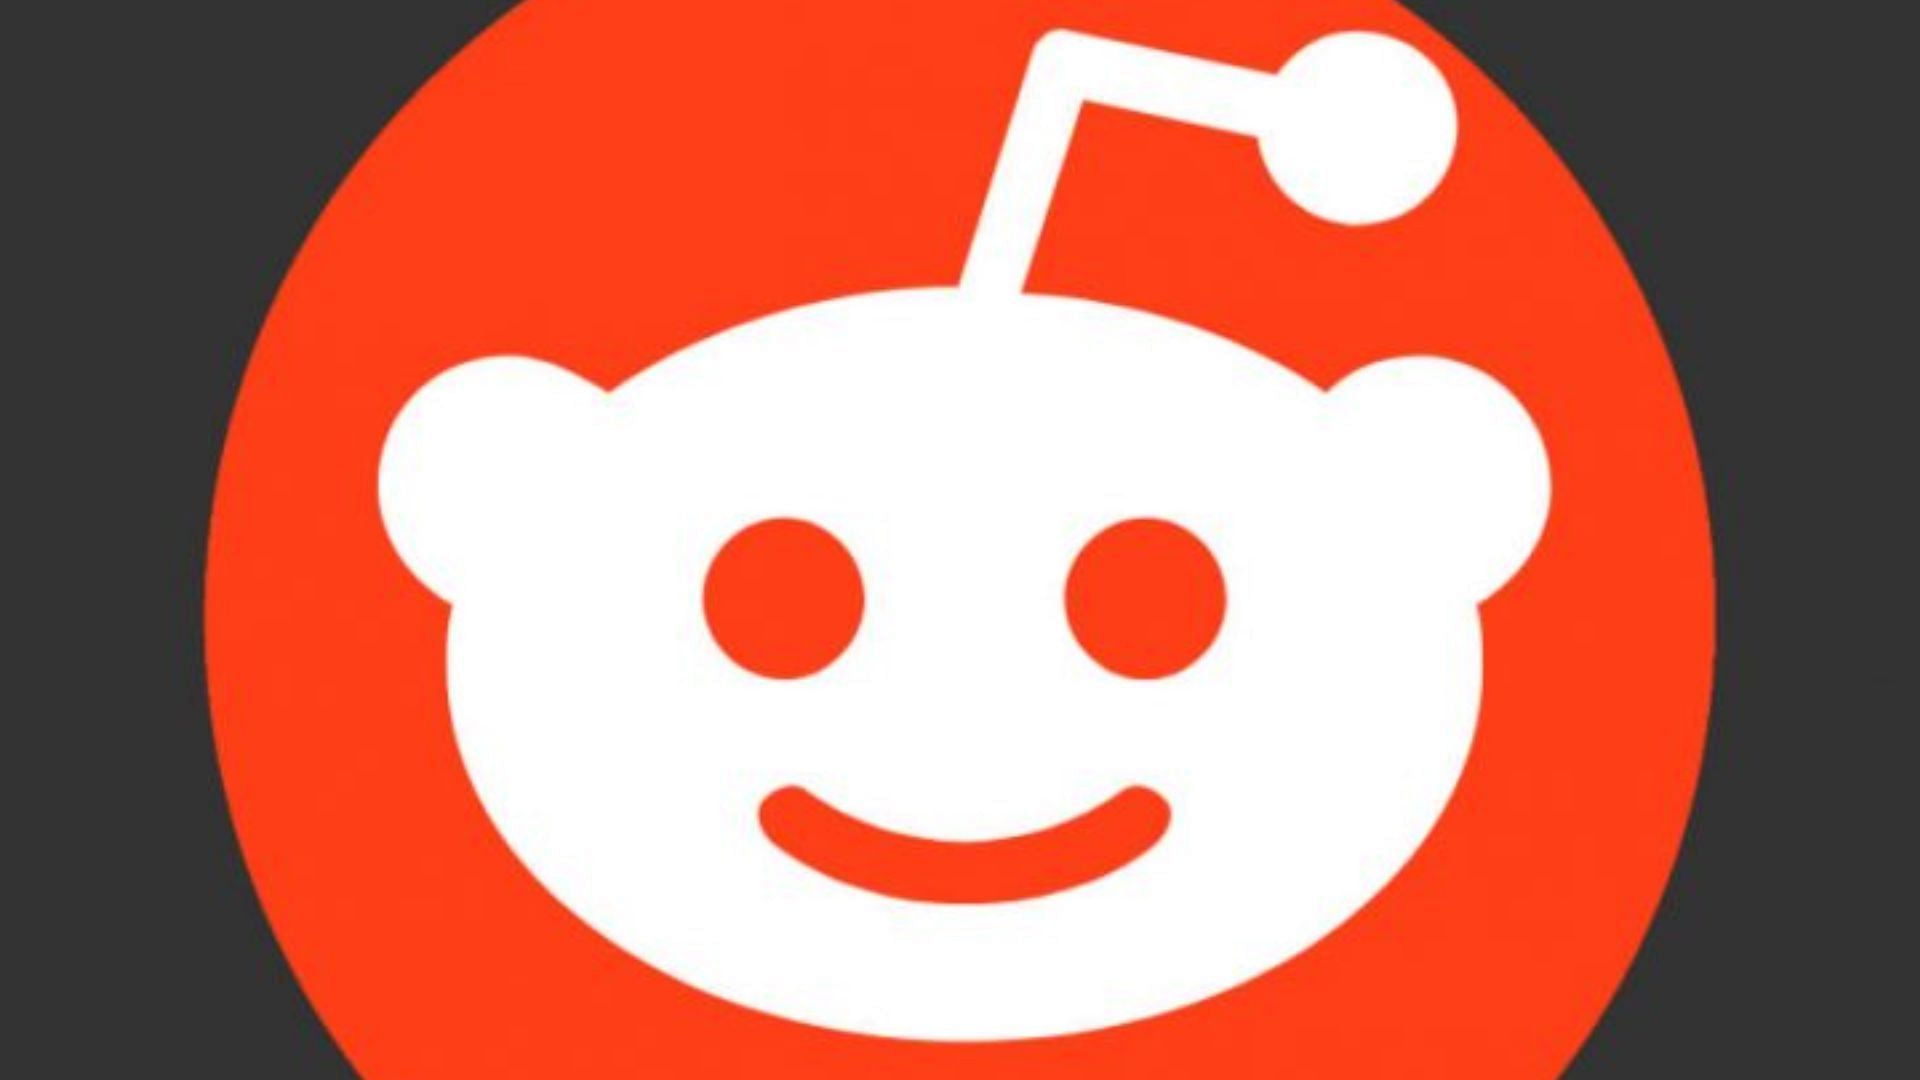 Reddit users are going on a 48 hour protest against the platform